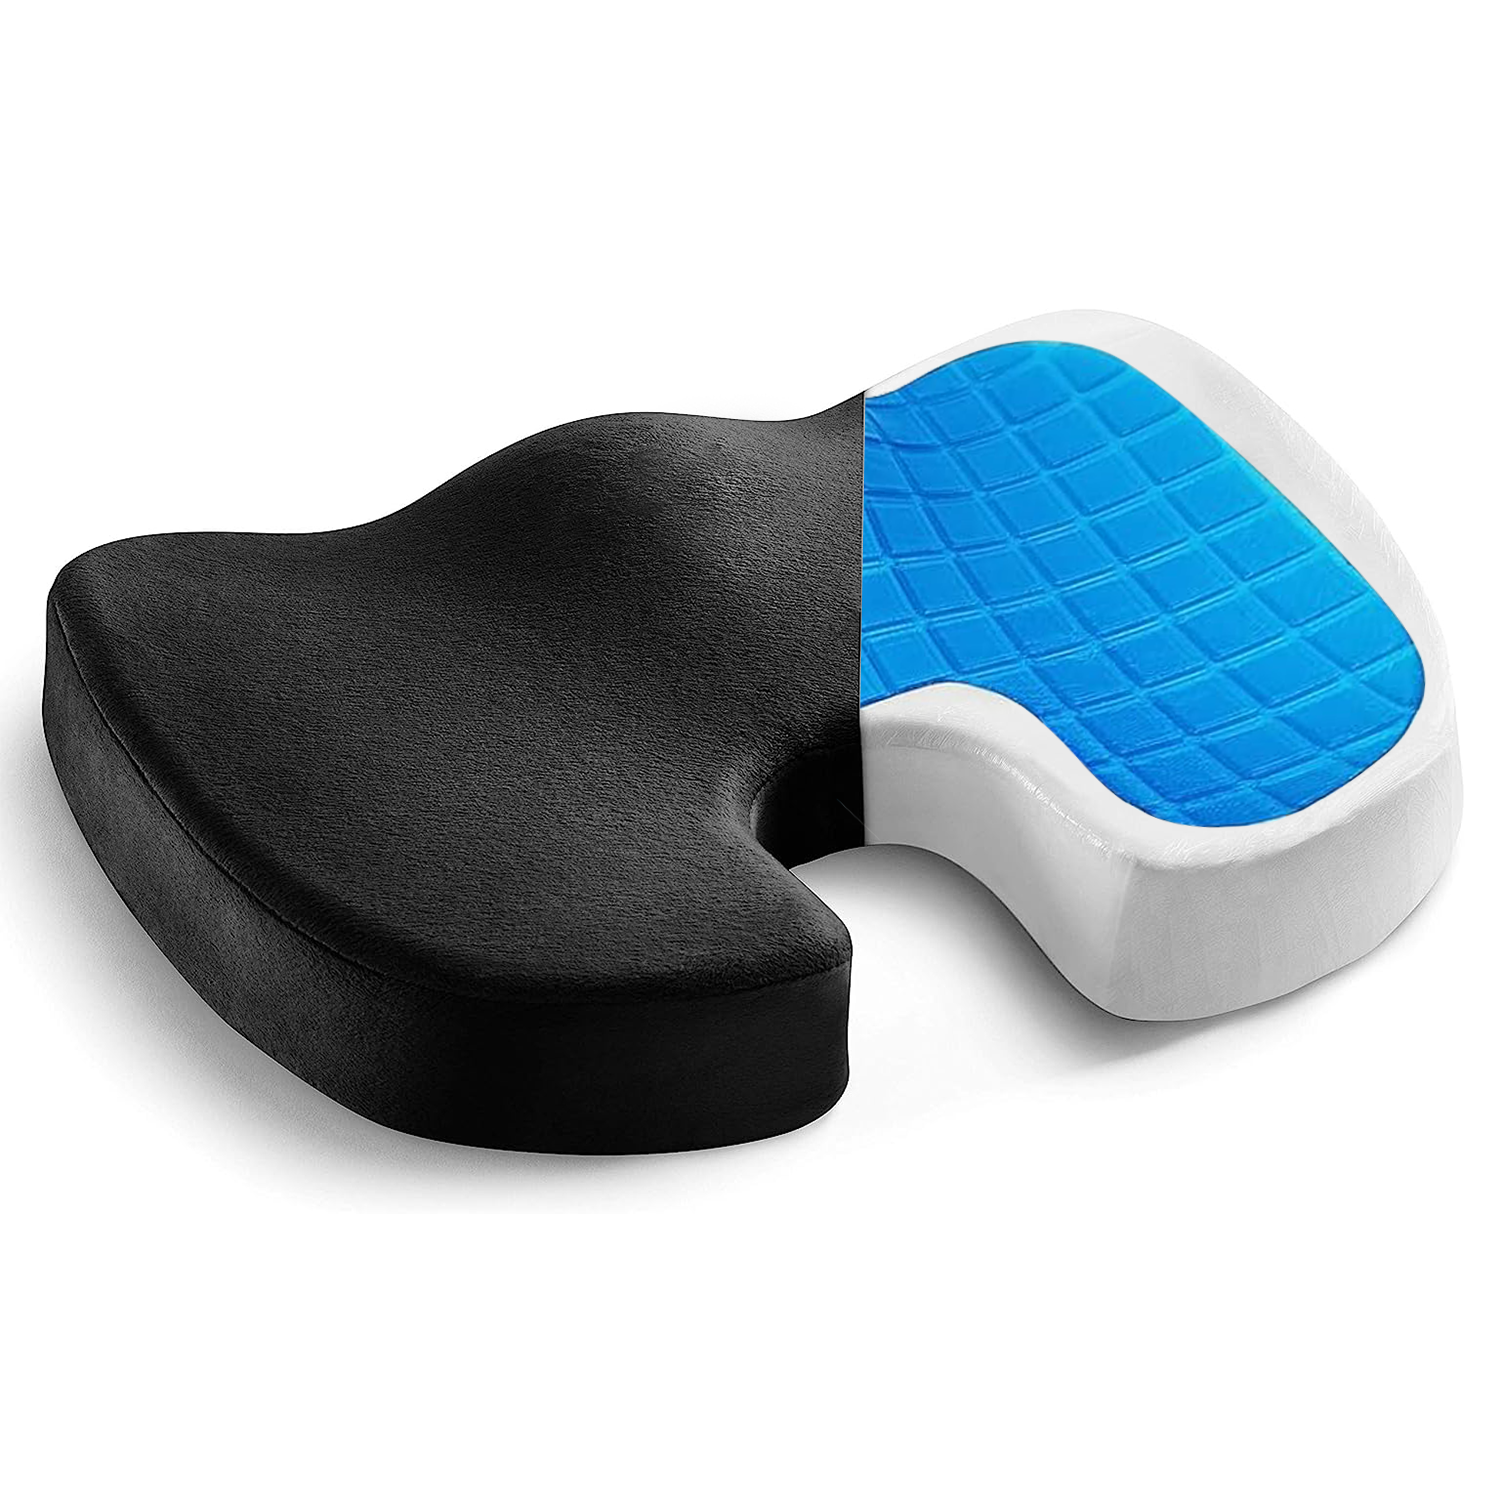 Seat Cushions -  Supports users tailbone and spine for reduced pain